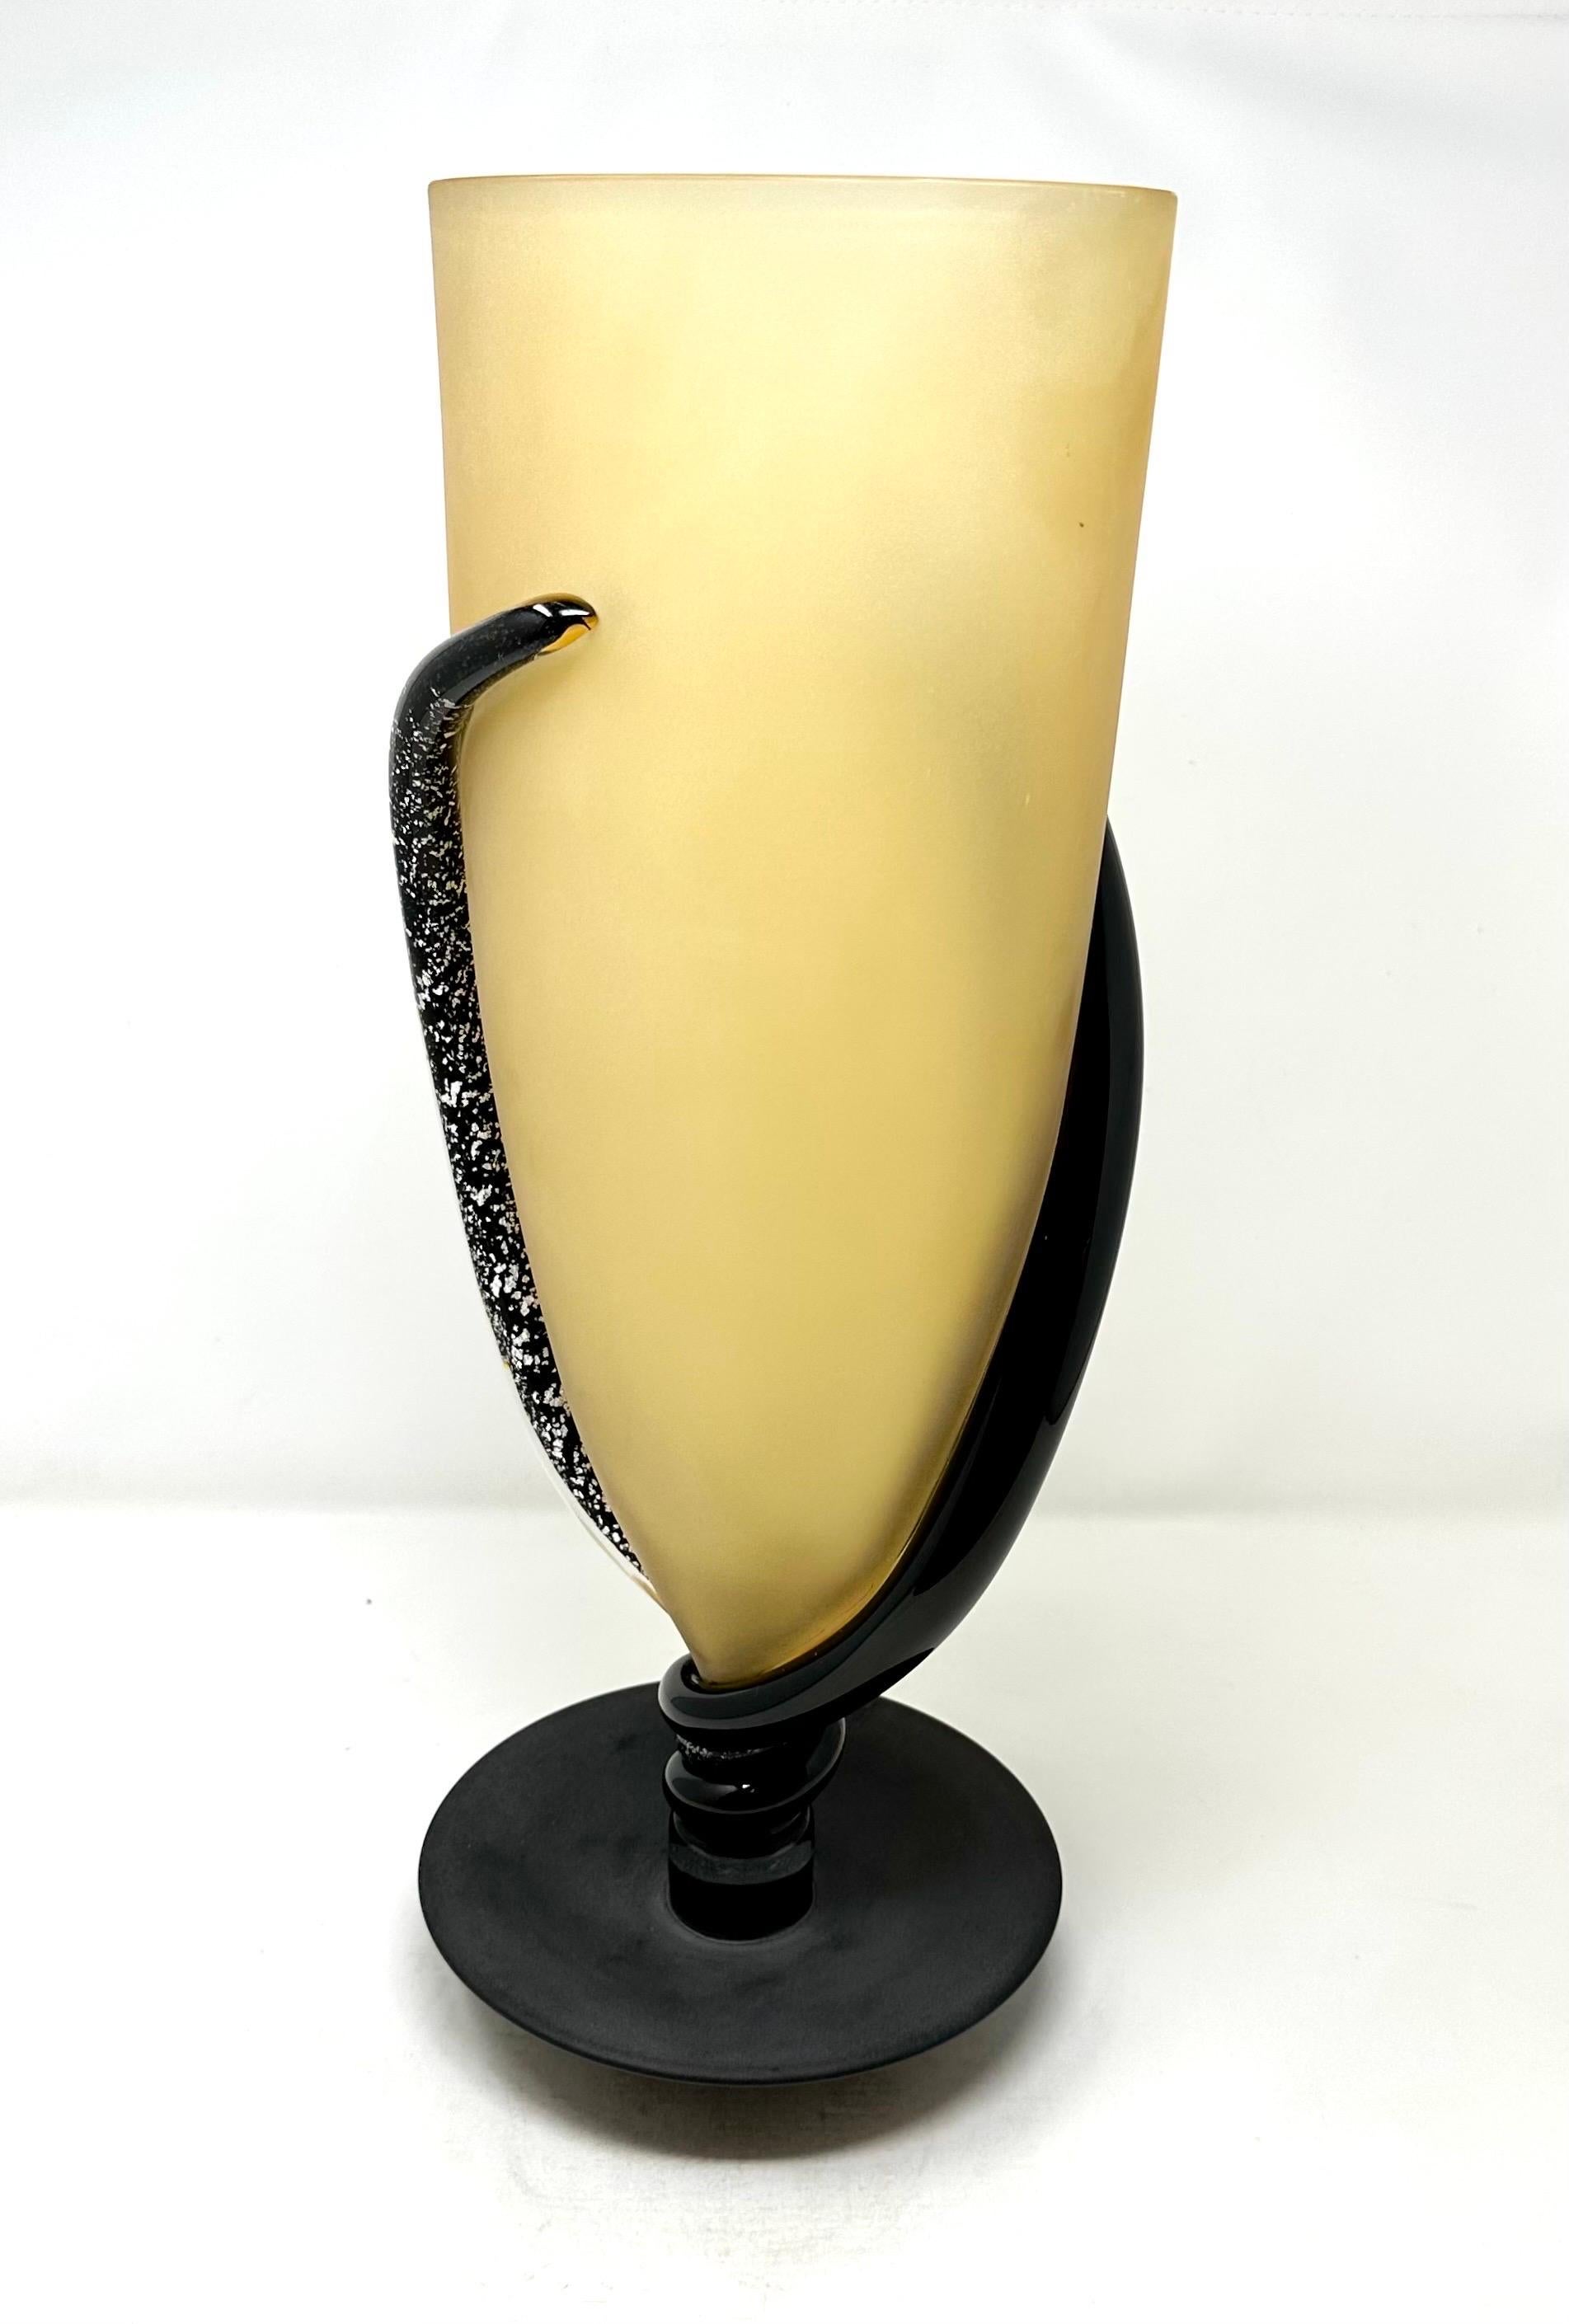 Contemporary Murano art glass vase by Marino Santi. A large and striking piece, in black and gold with white accents, signed on the underside and labeled. In excellent condition.

Width: 8 in / Depth: 8 in / Height: 19 in